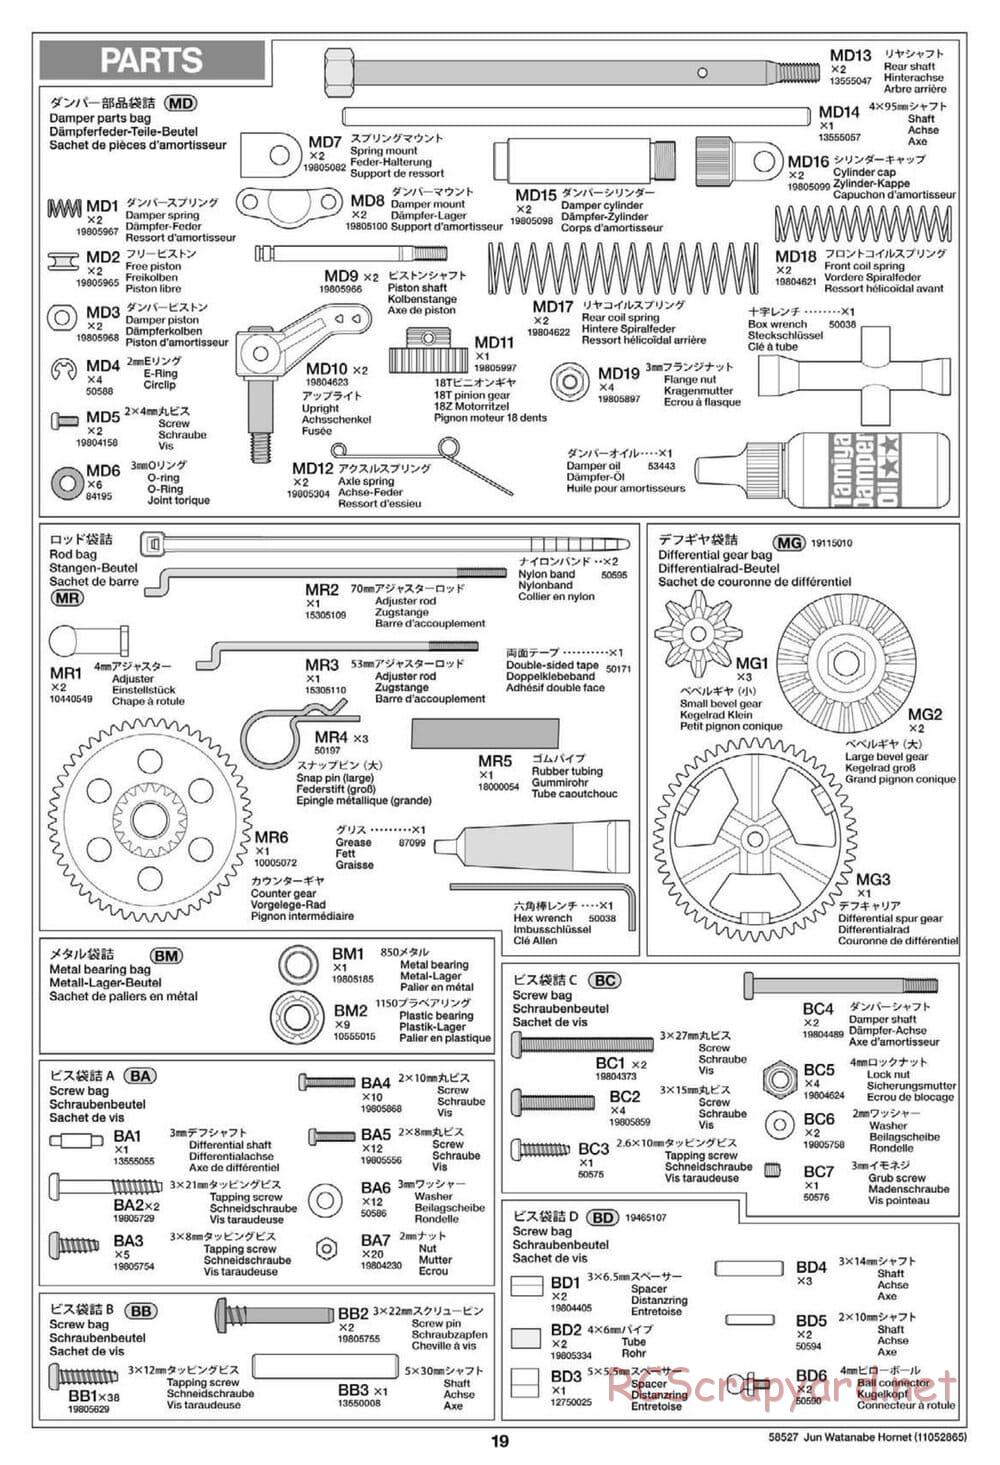 Tamiya - The Hornet by Jun Watanabe - GH Chassis - Manual - Page 19